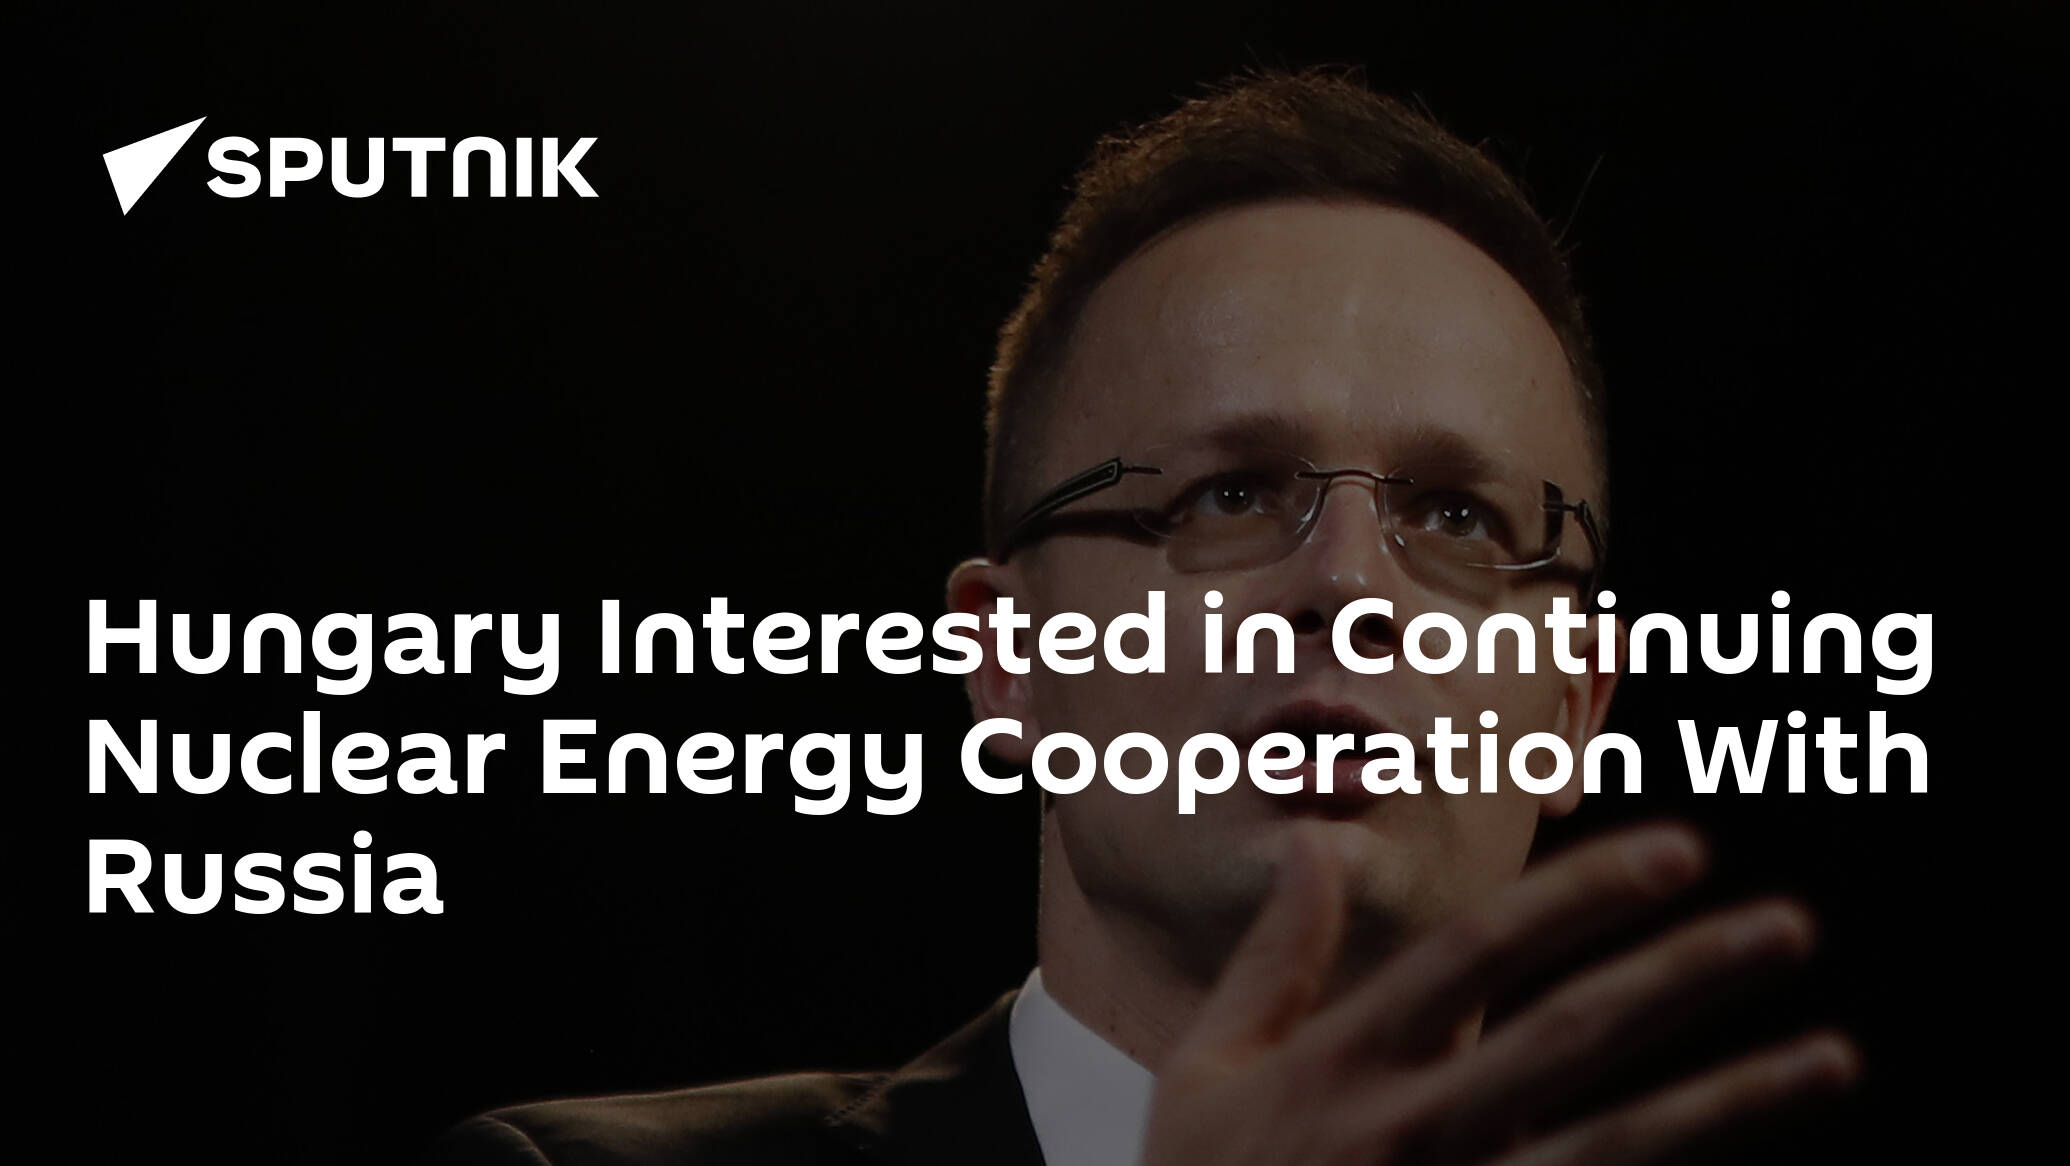 Hungary Interested in Continuing Nuclear Energy Cooperation With Russia